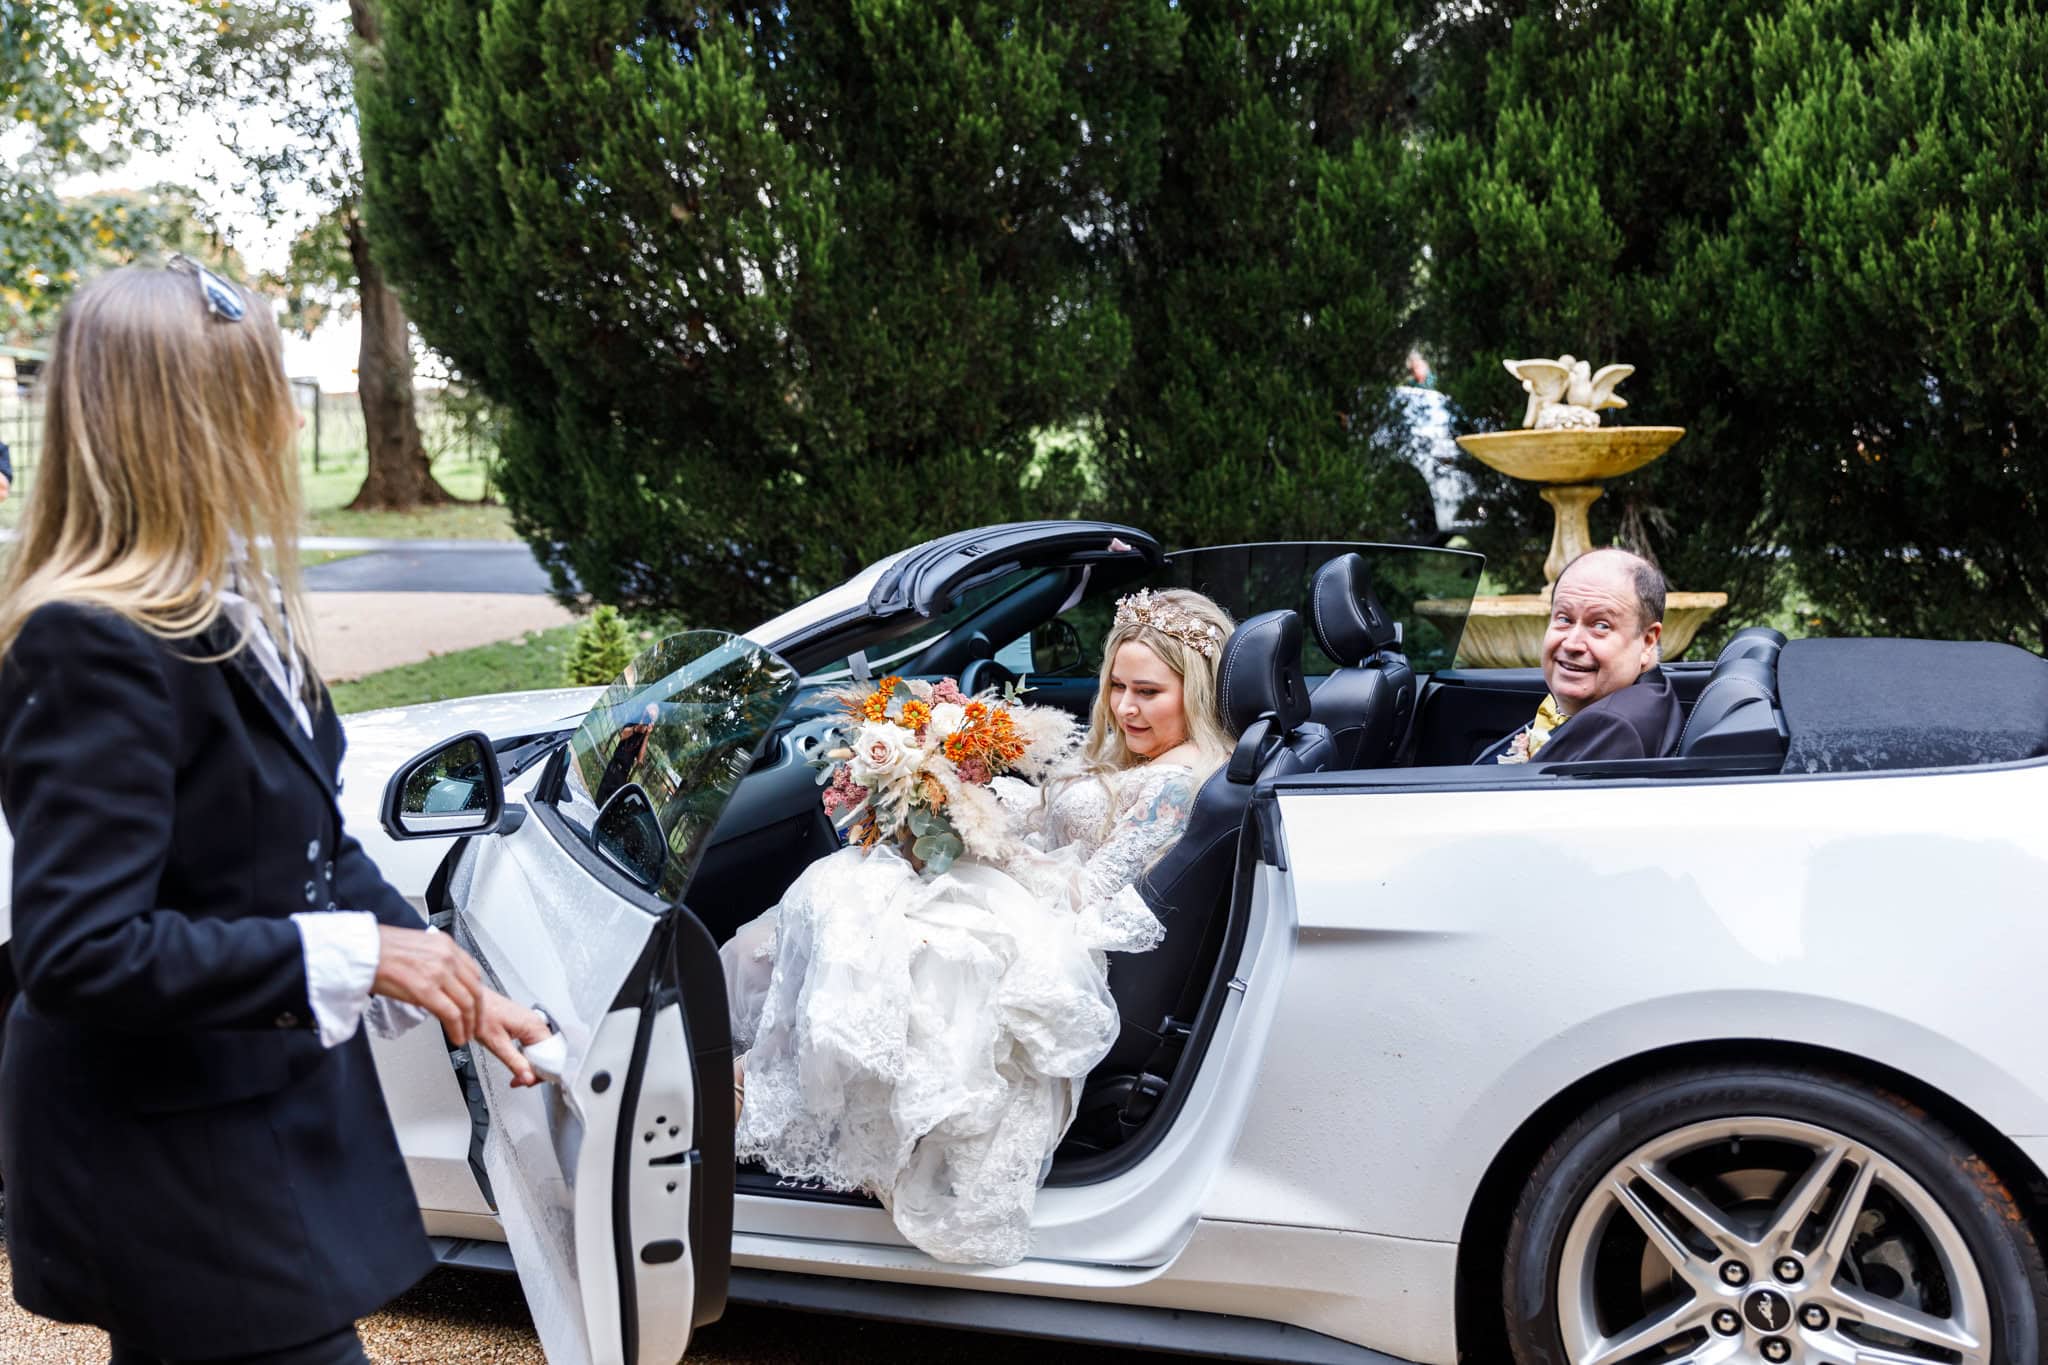 Brides arrival at Cedar Creek Estate Winery on her wedding day, by Mooi Photography.